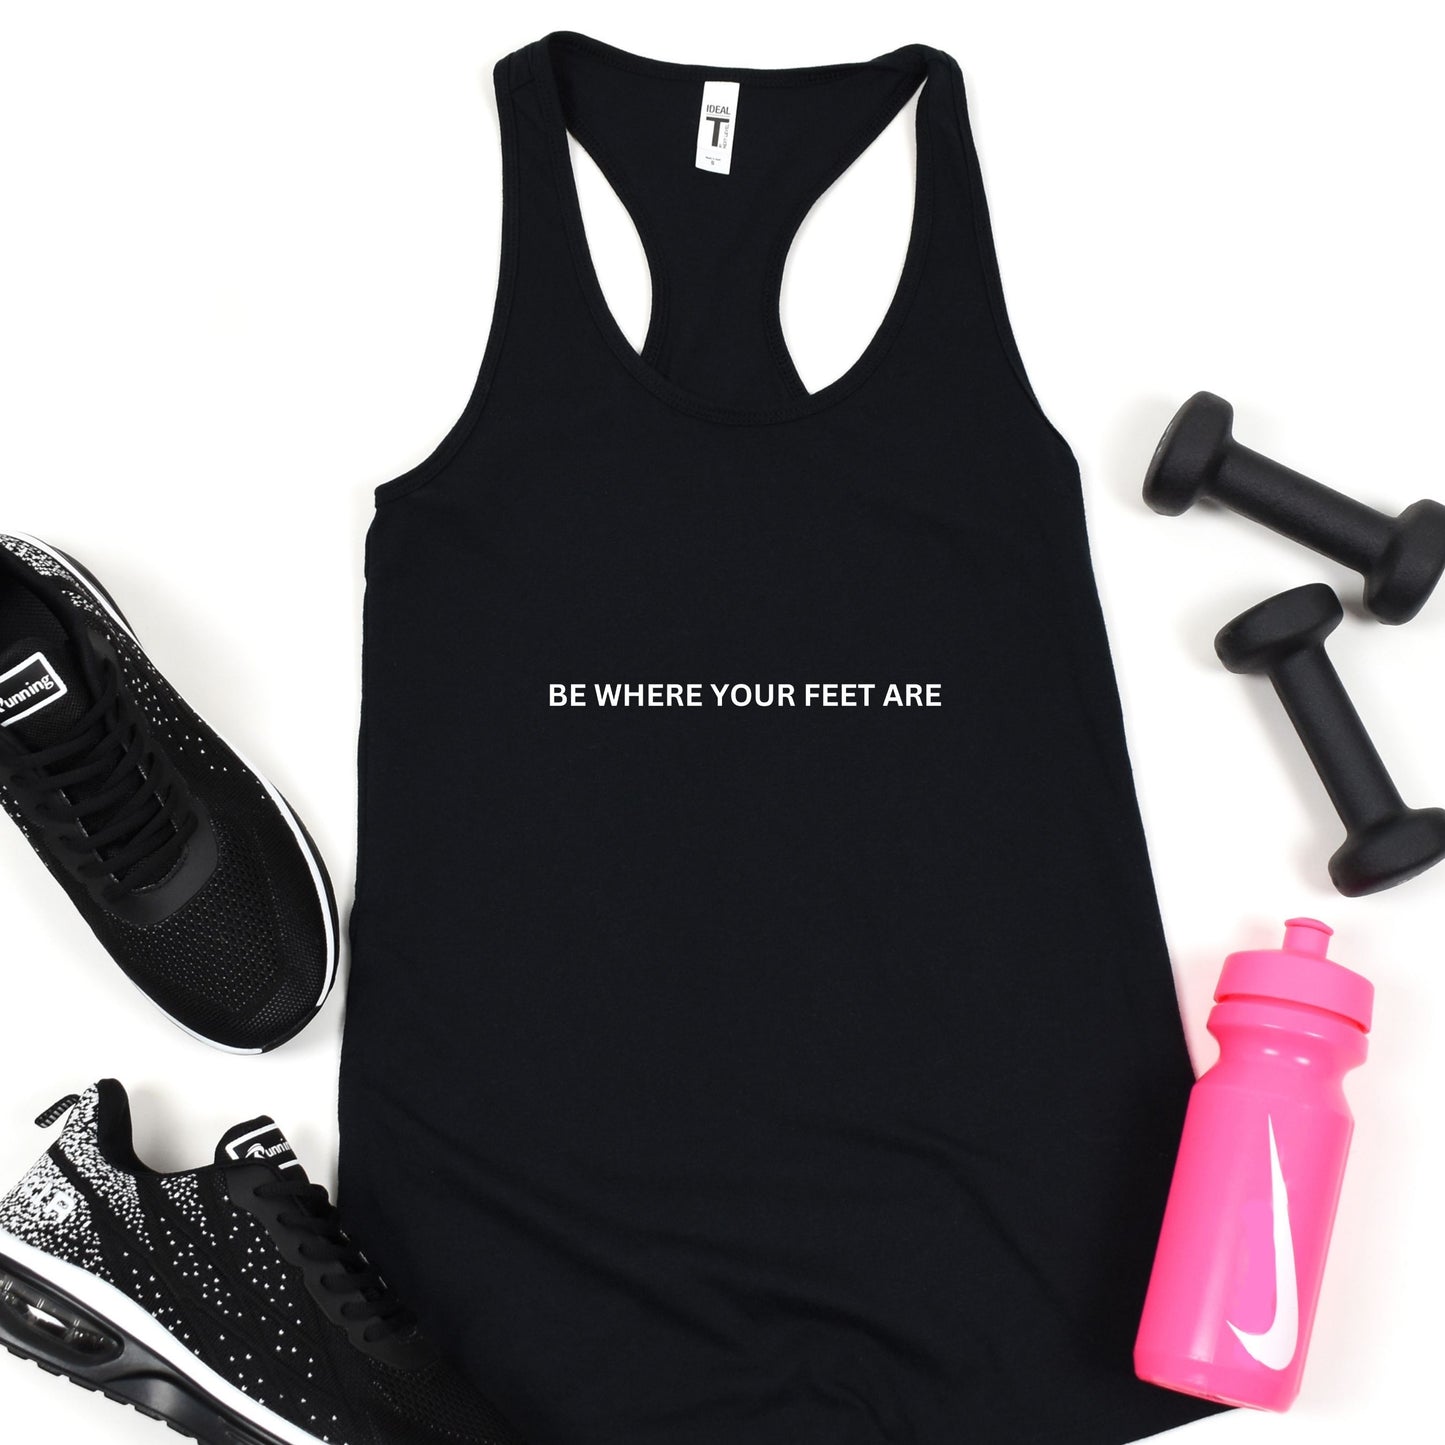 Be Where Your Feet Are Women's Racerback Tank